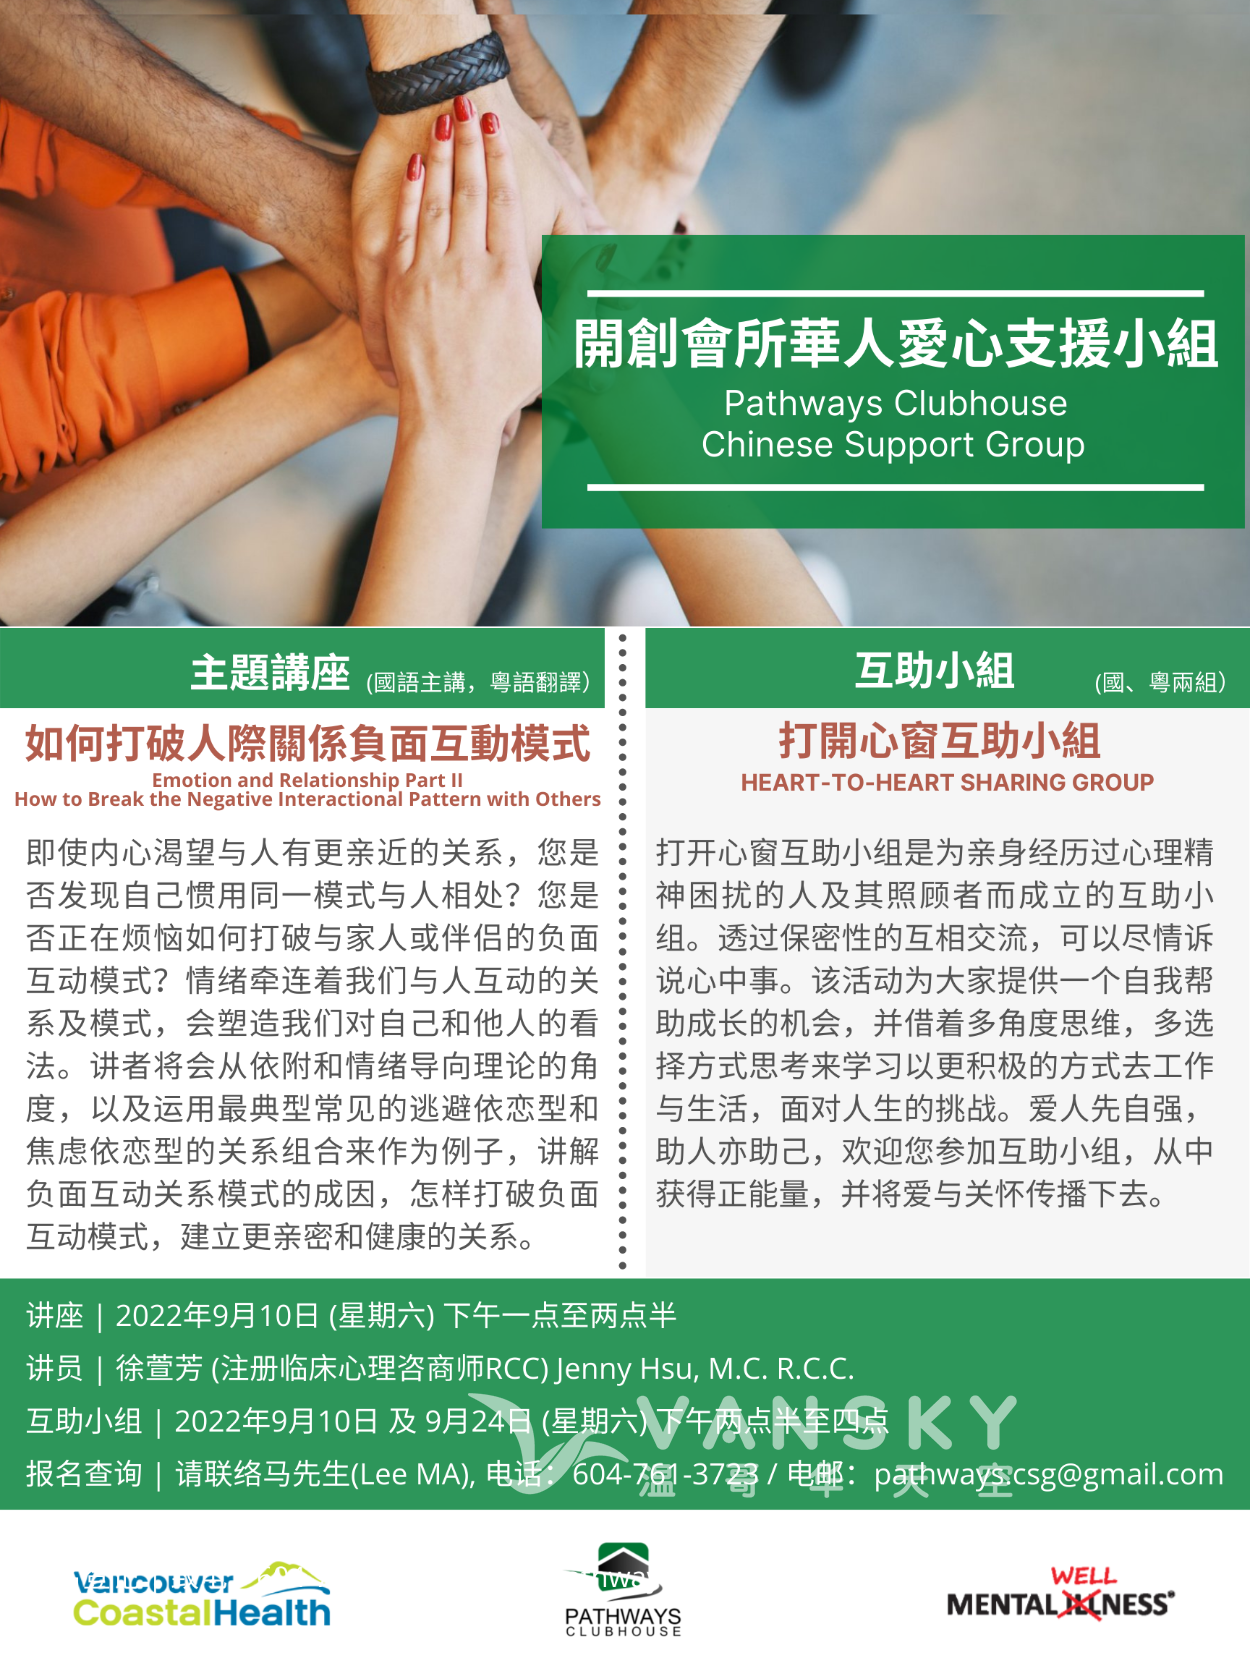 220819150335_Flyer 2022.09.10_PNG_NZL_Simplified Chinese.png